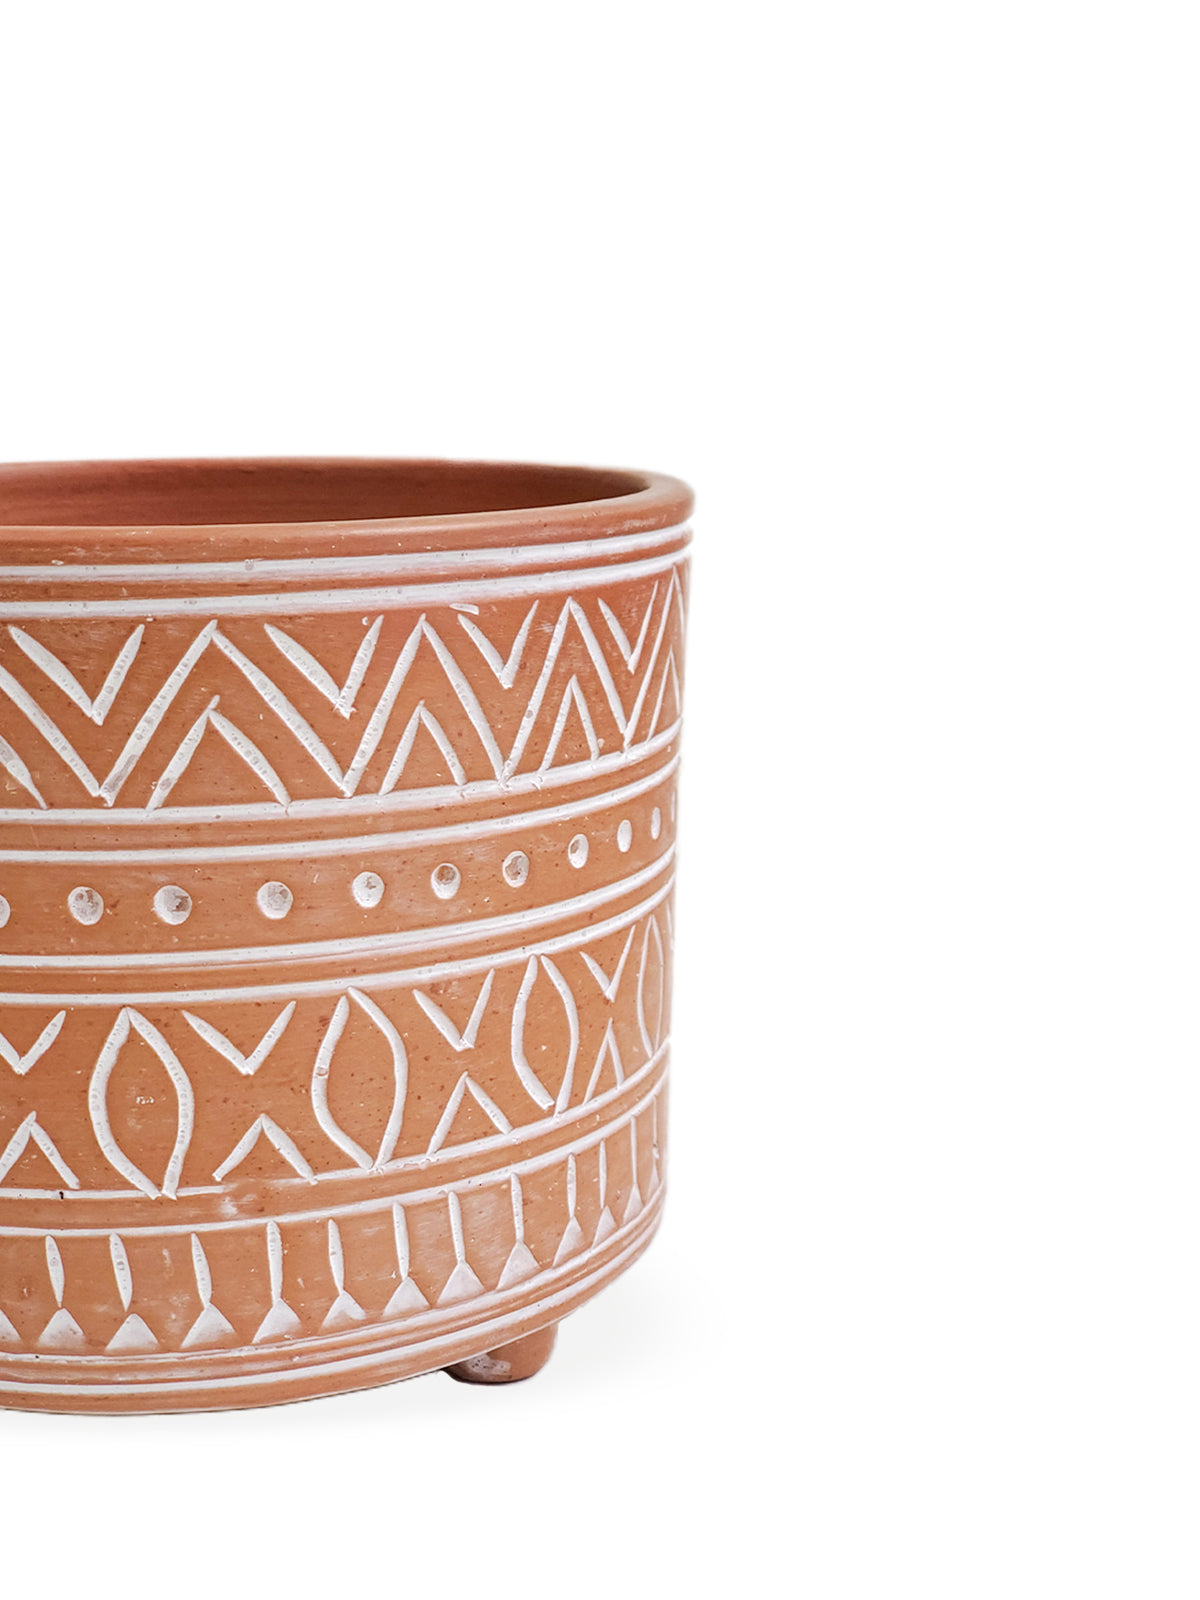 Hand Etched Terracotta Pot - Small by KORISSA